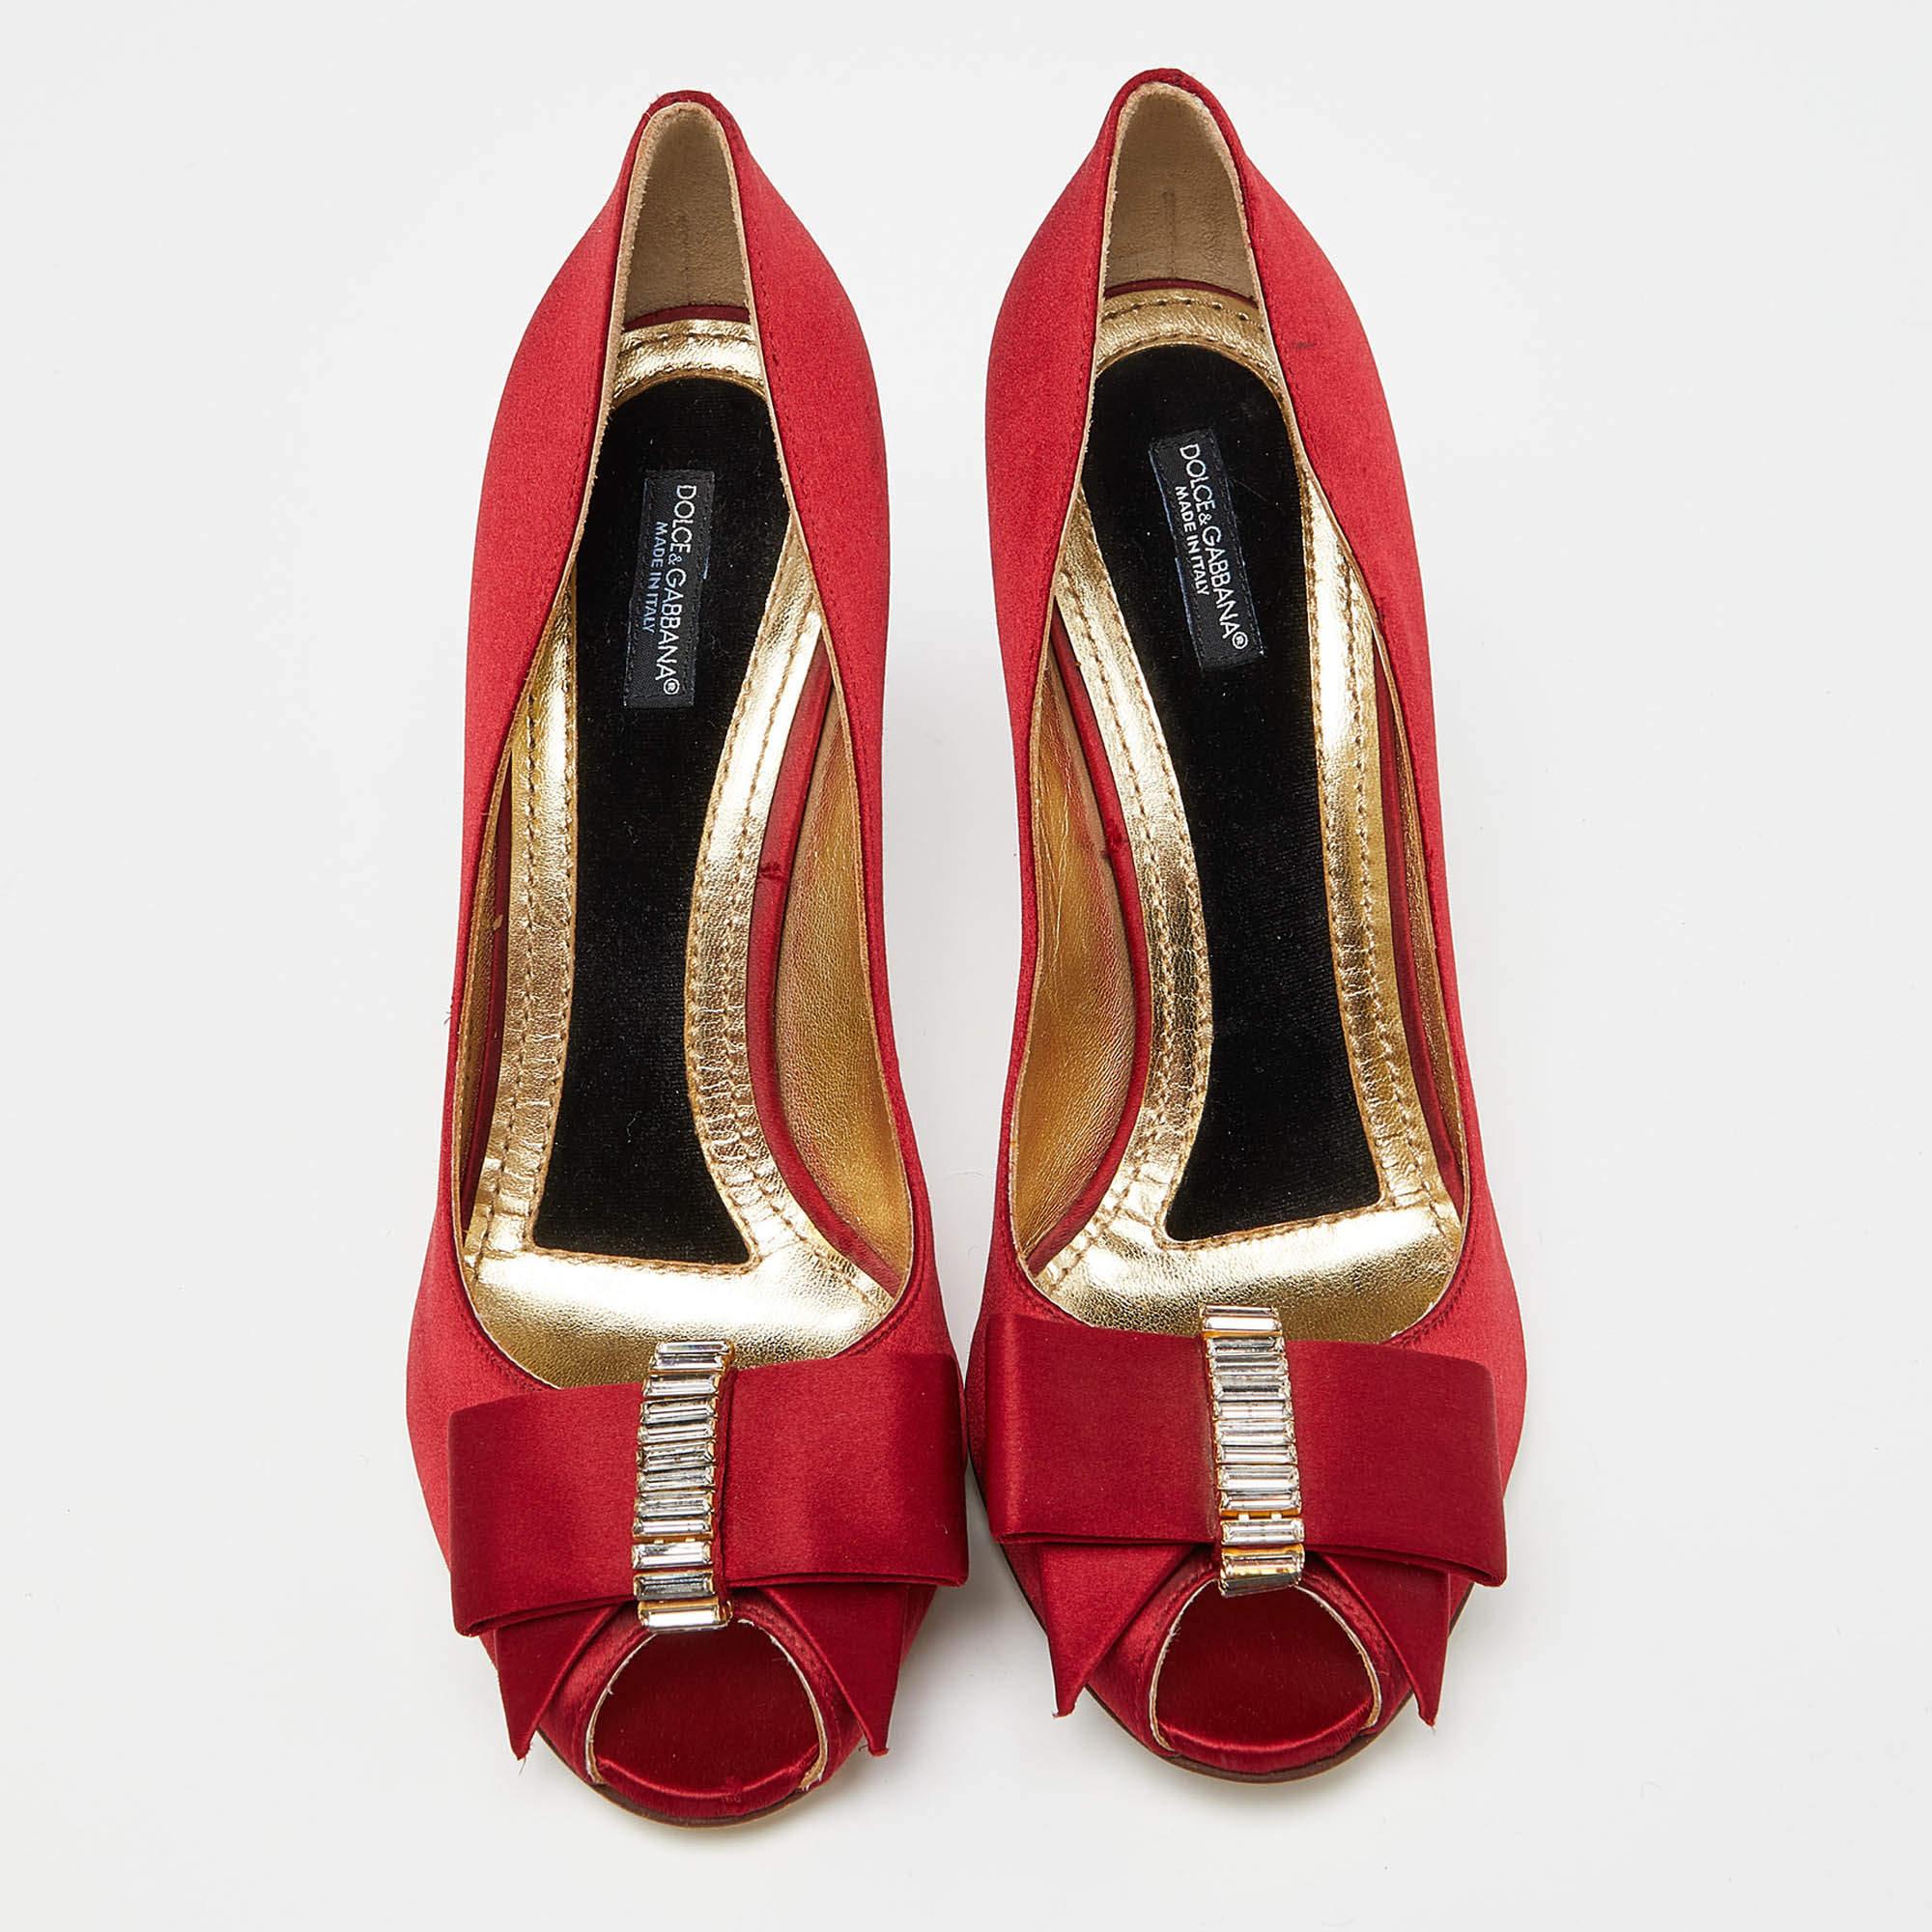 Dolce & Gabbana Red Satin Crystal Embellished Bow Peep Toe Pumps Size 37 For Sale 1